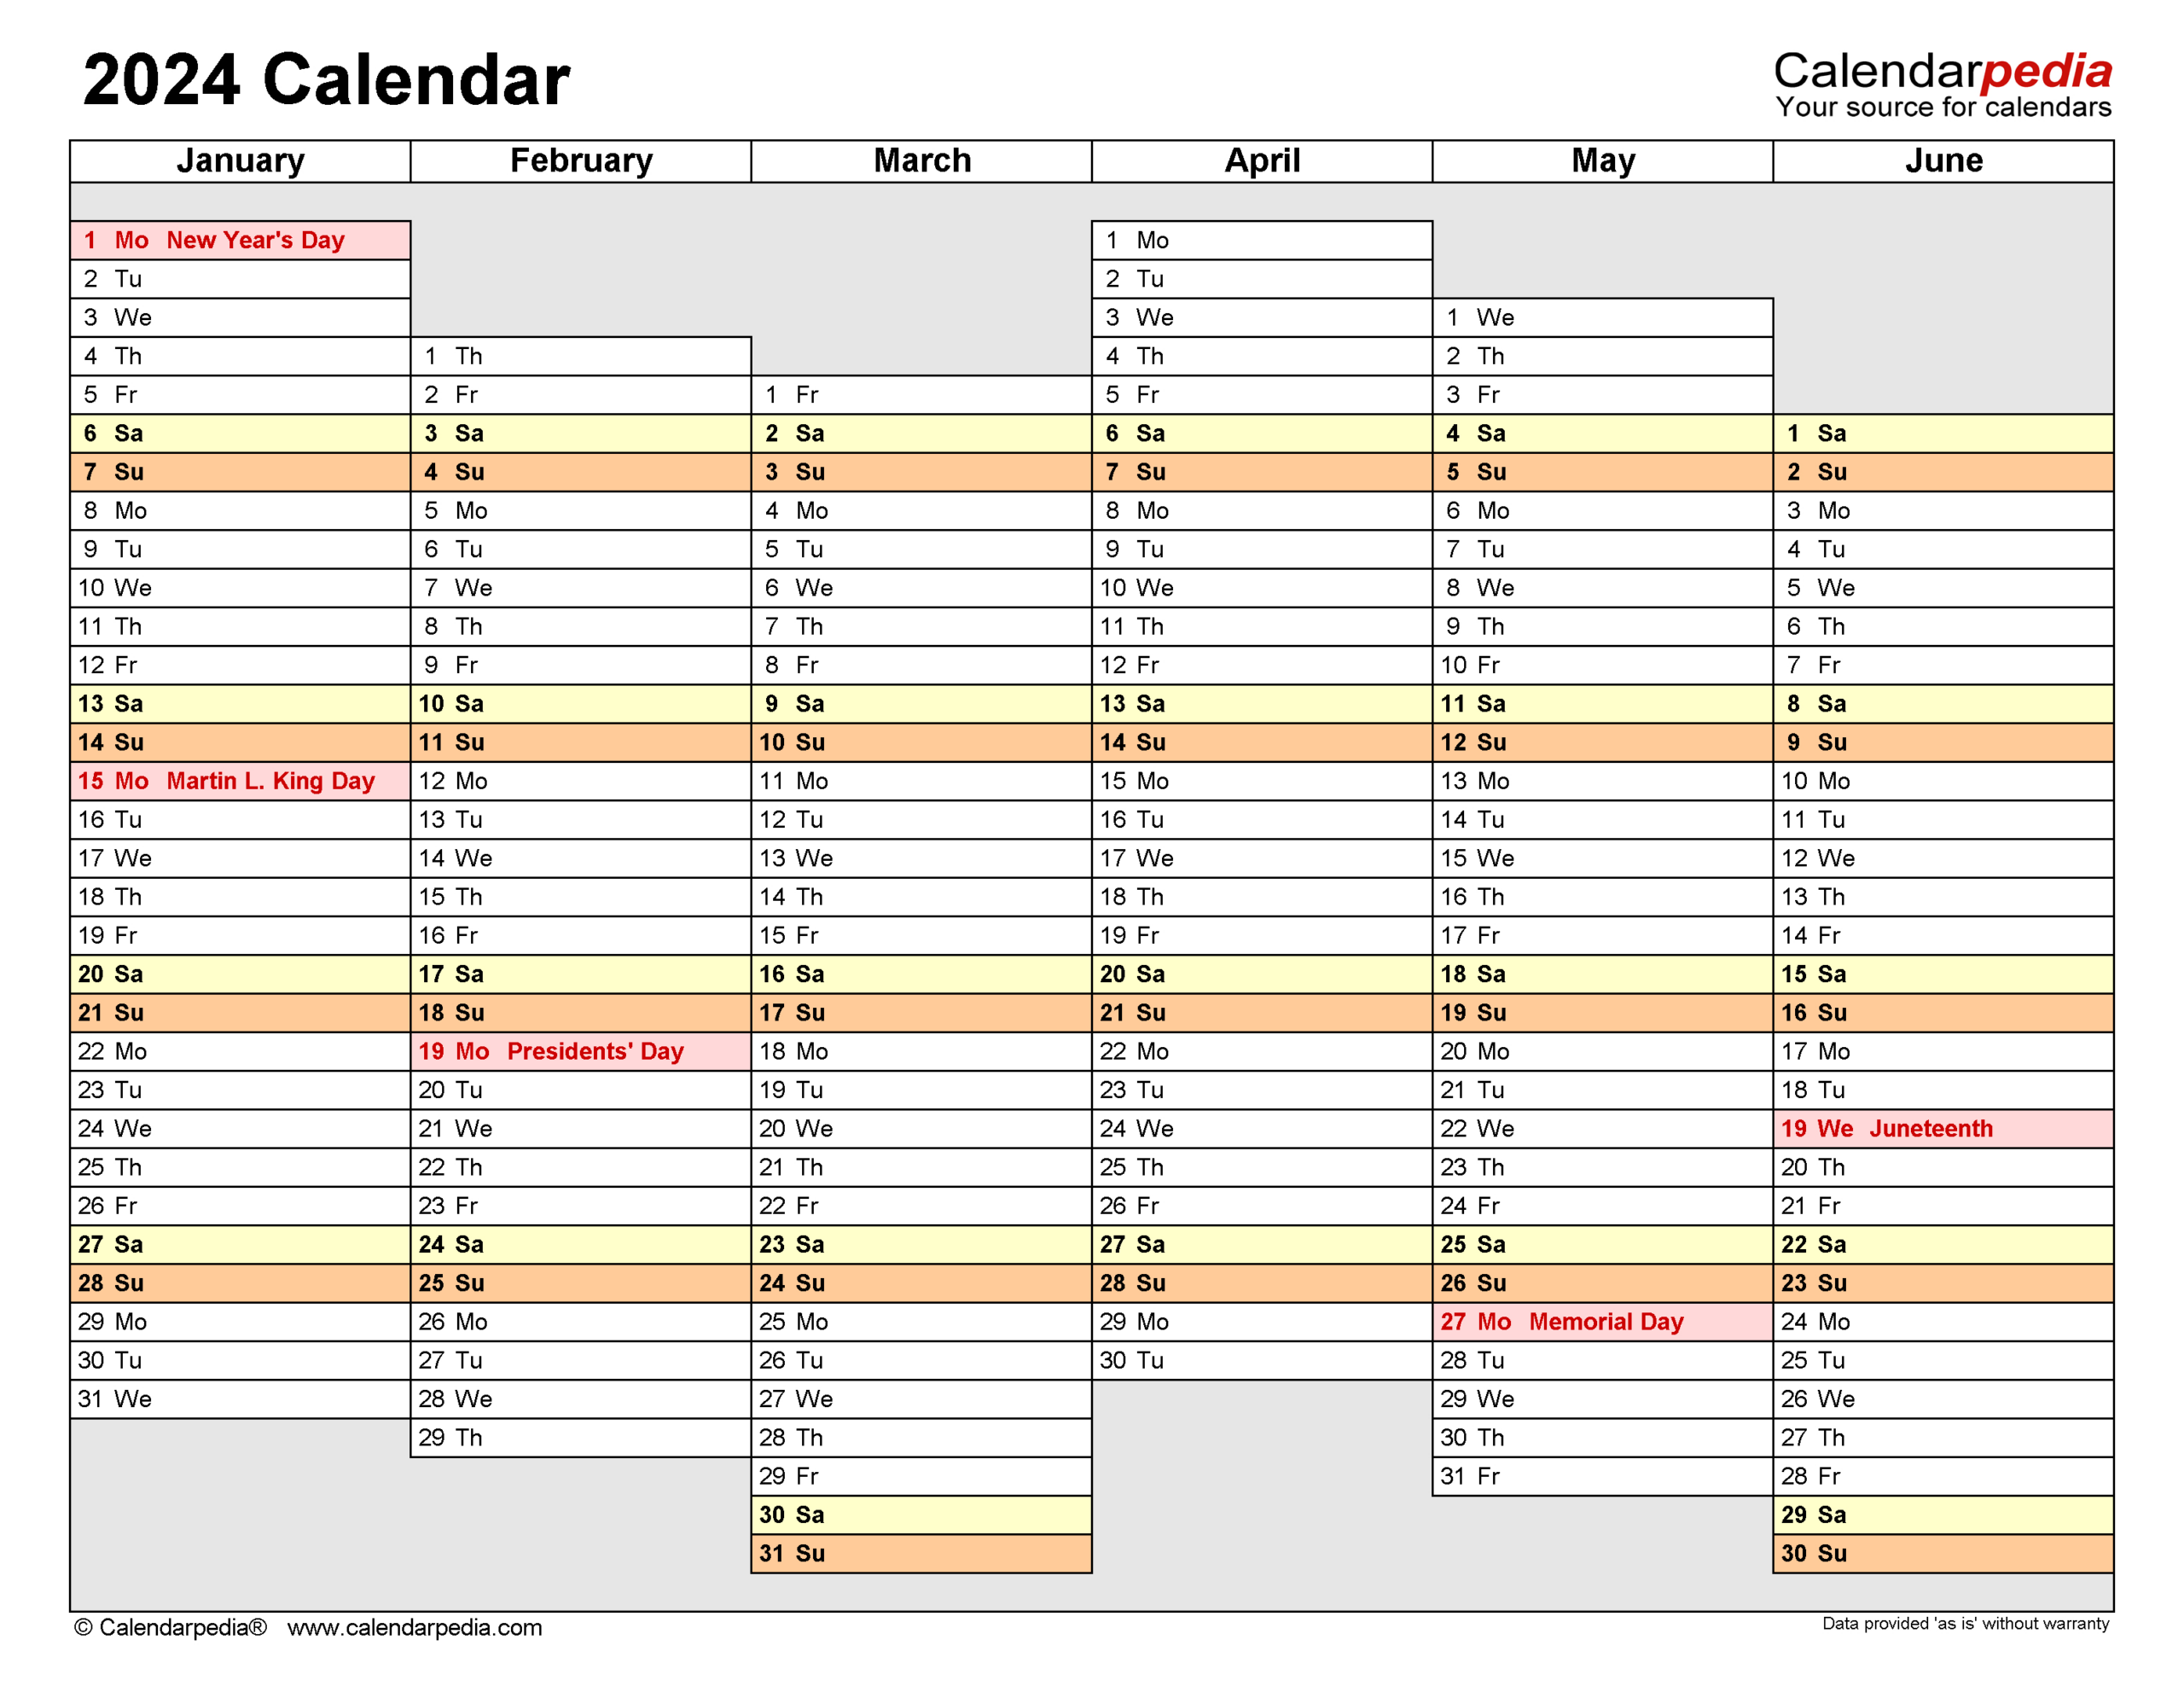 2024 Calendar - Free Printable Excel Templates - Calendarpedia | 2024 Yearly Planner Template